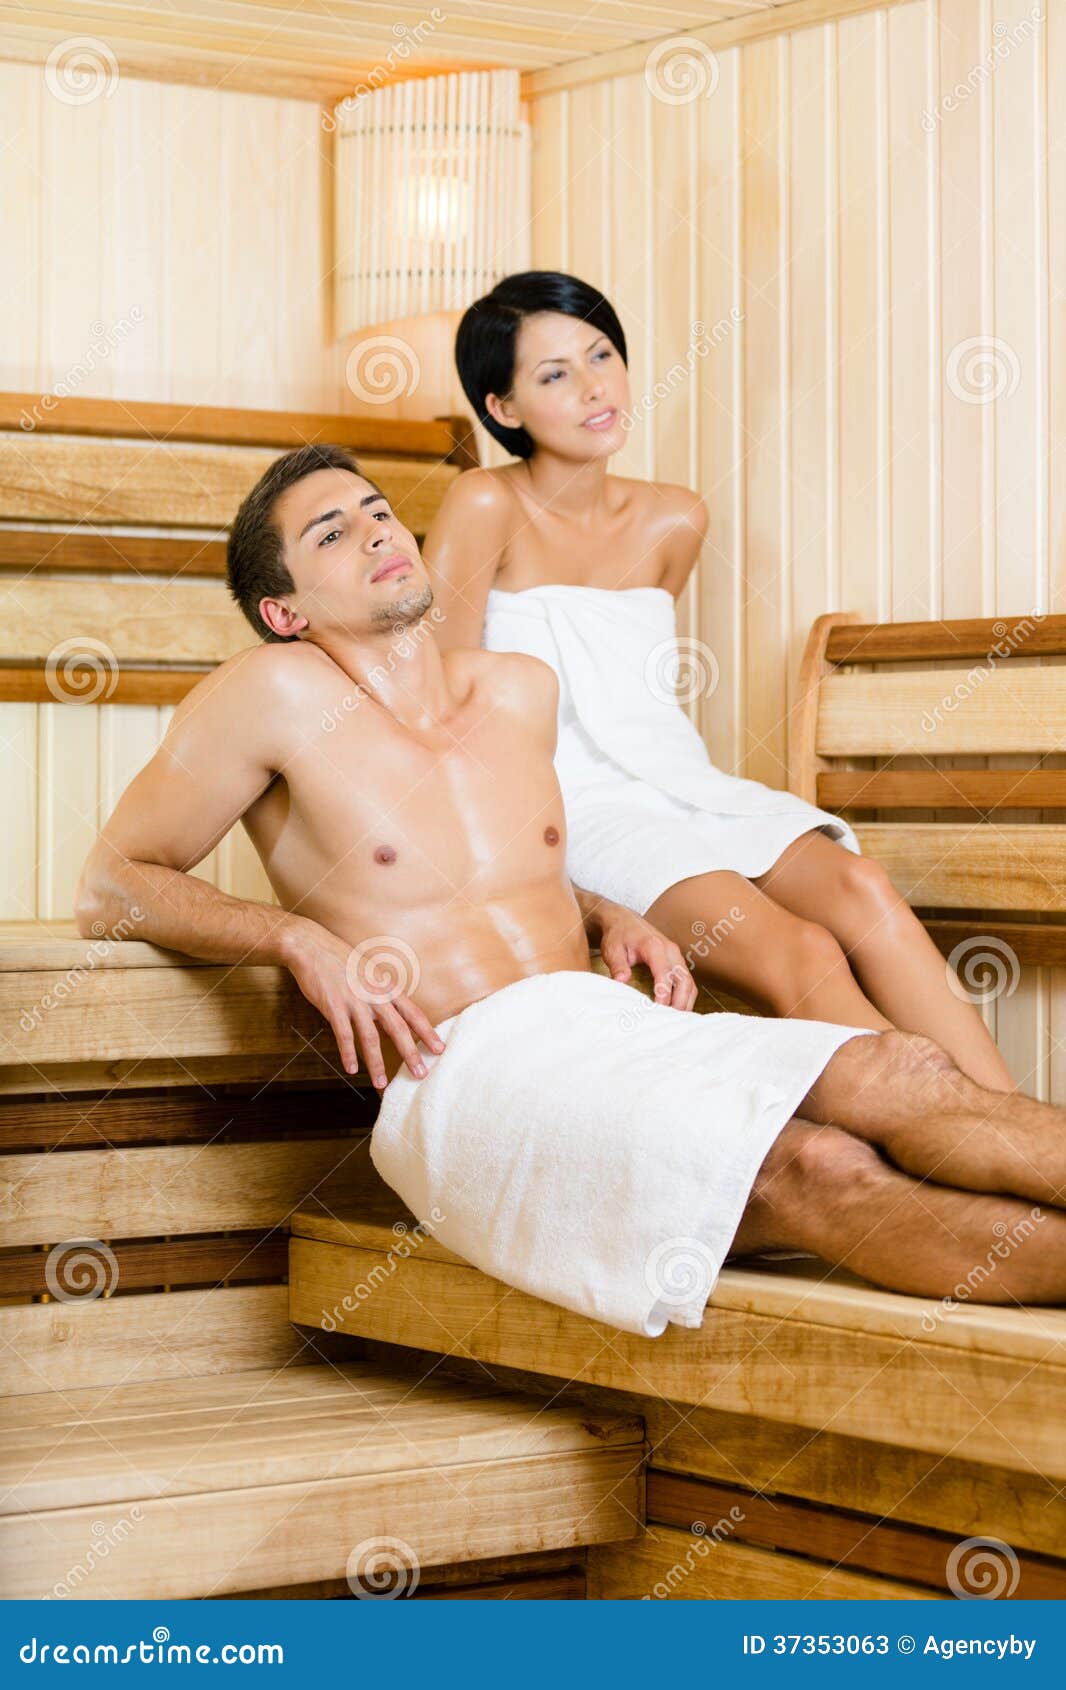 Half Naked Man And Young Woman Relaxing In Sauna Stock